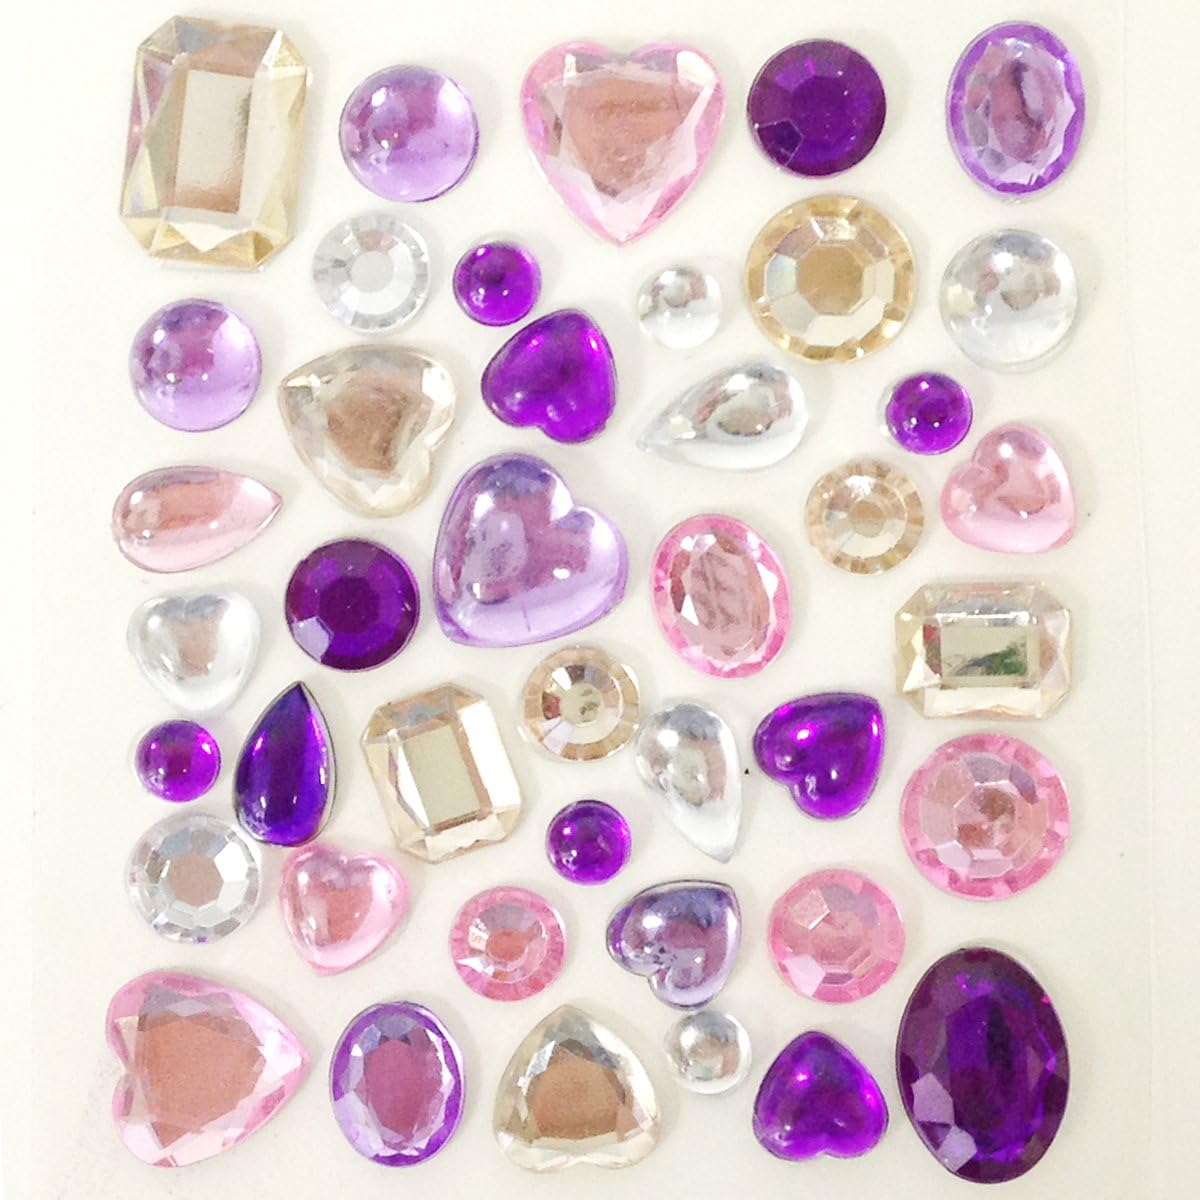 Wrapables Acrylic Self Adhesive Crystal Gem Stickers, Purple/Pink/Gold (2pk)